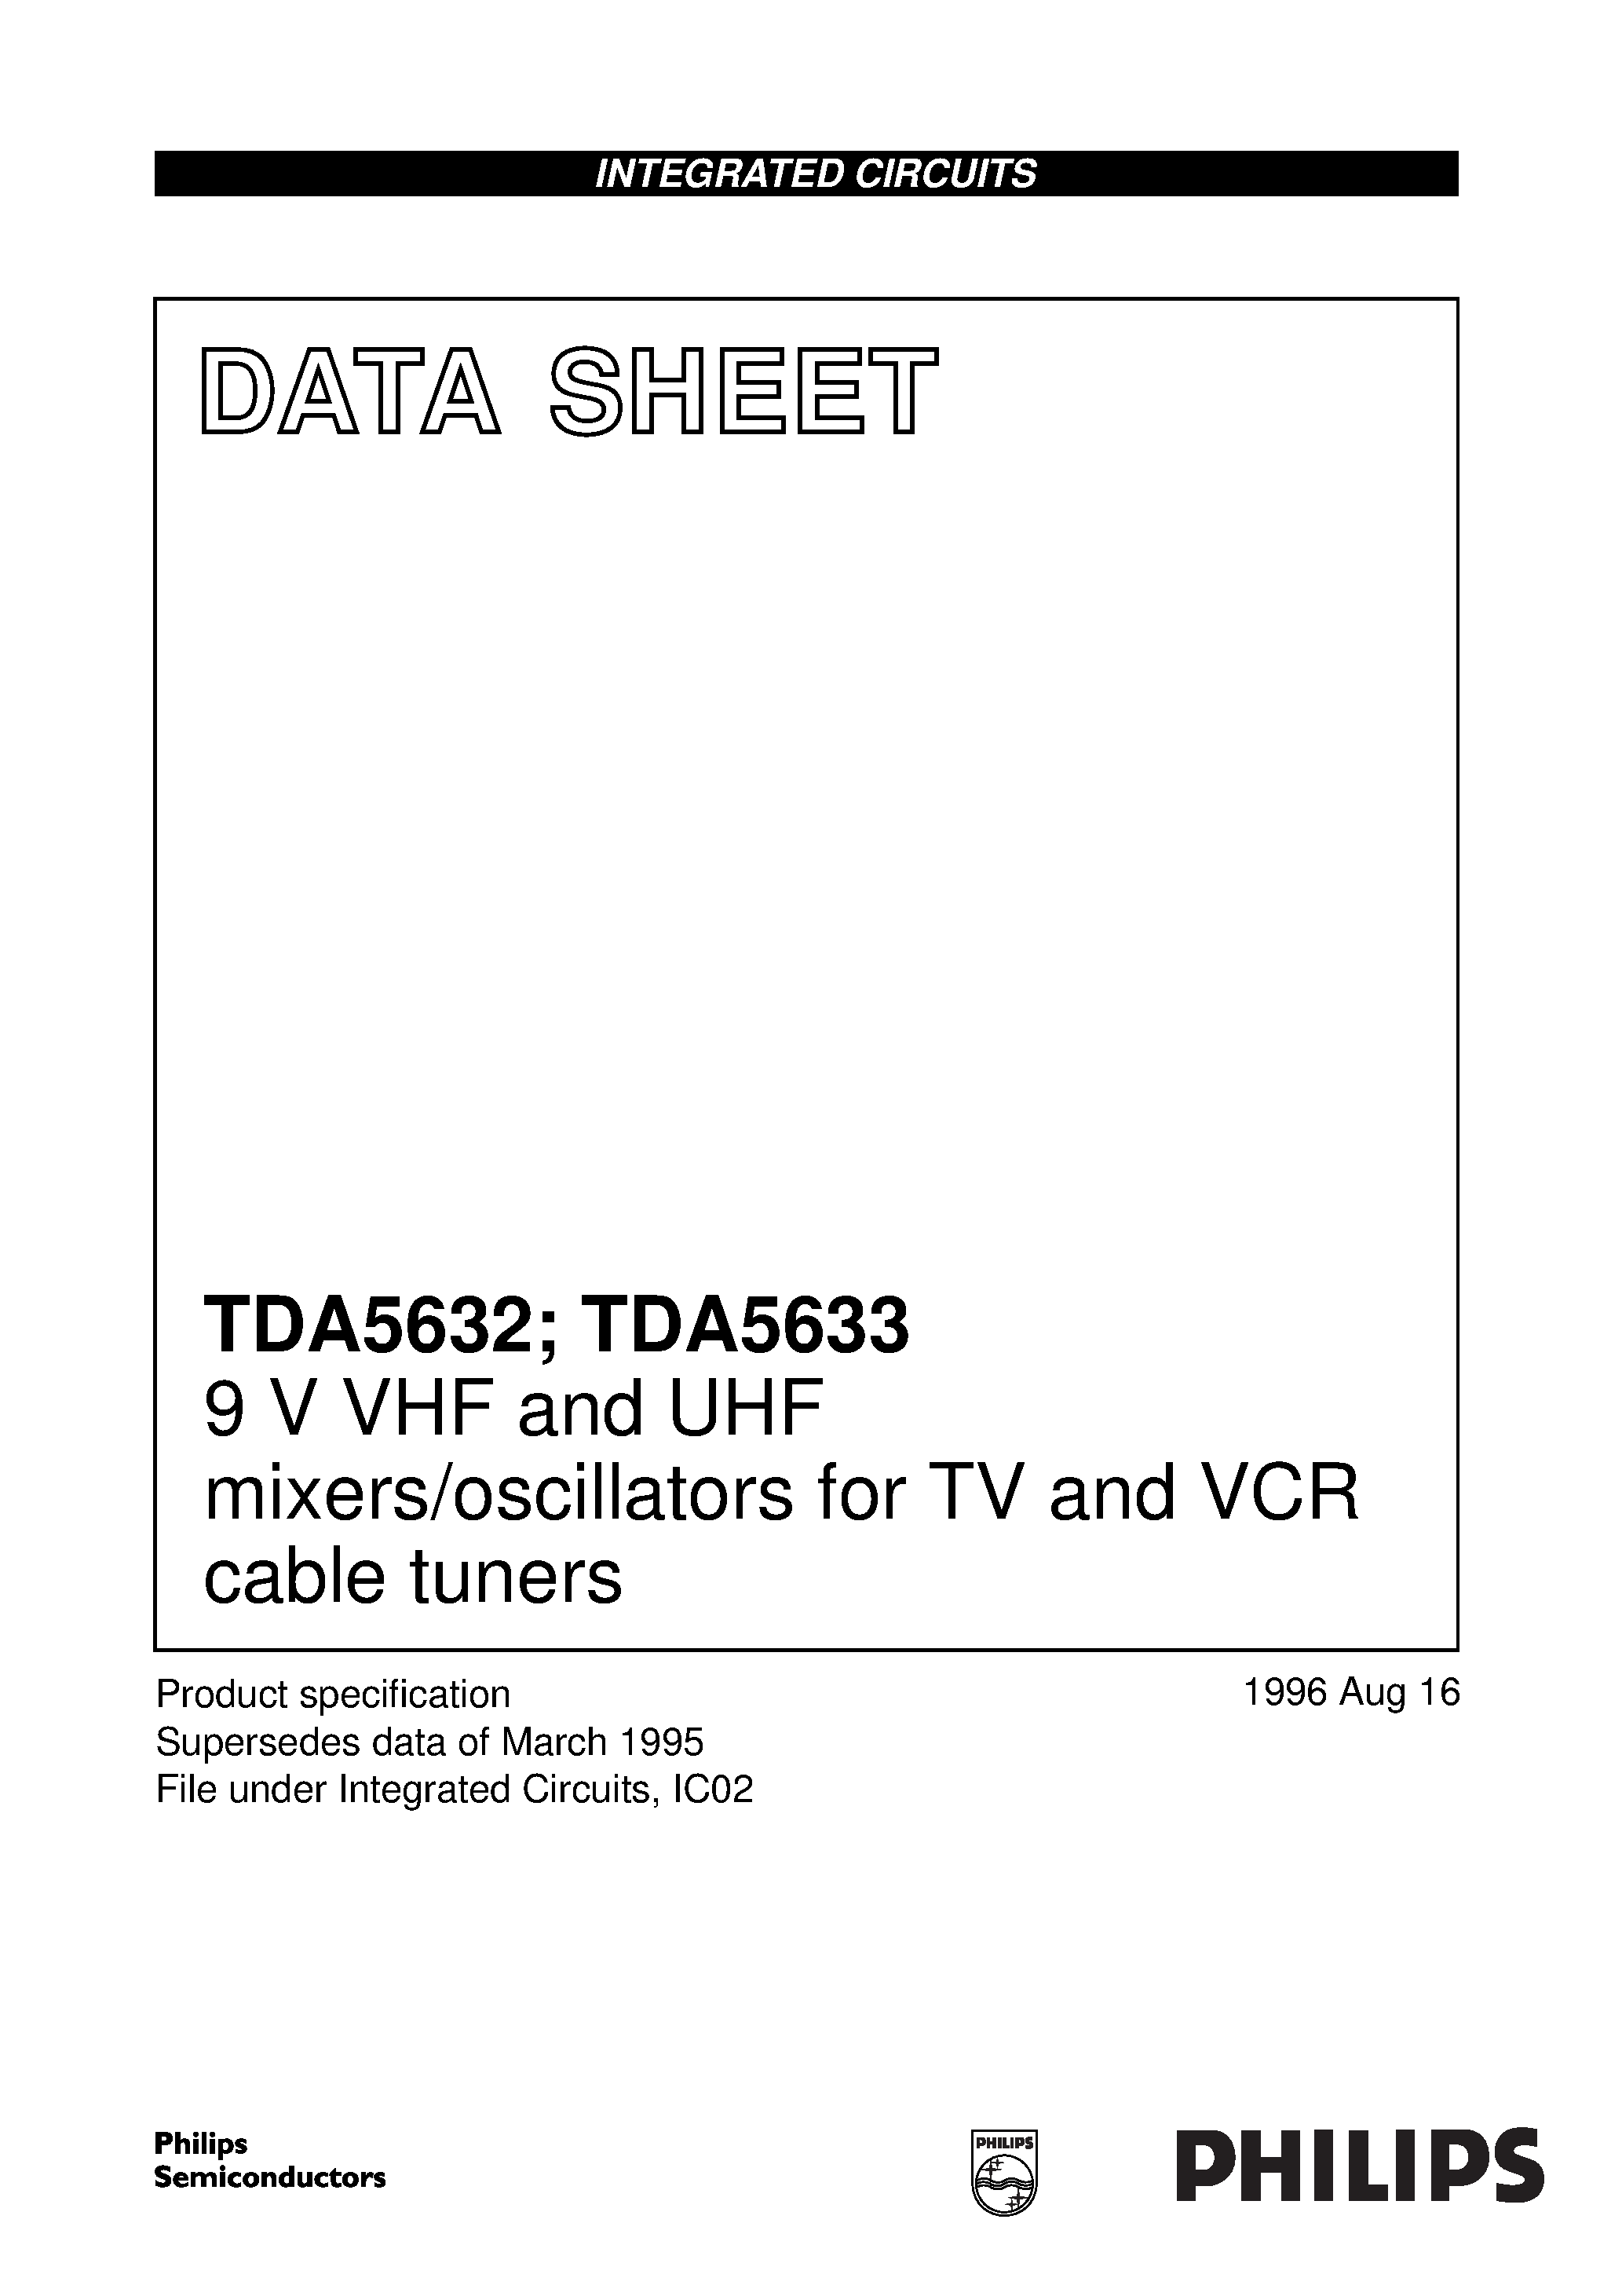 Даташит TDA5632M - 9 V VHF and UHF mixers/oscillators for TV and VCR cable tuners страница 1